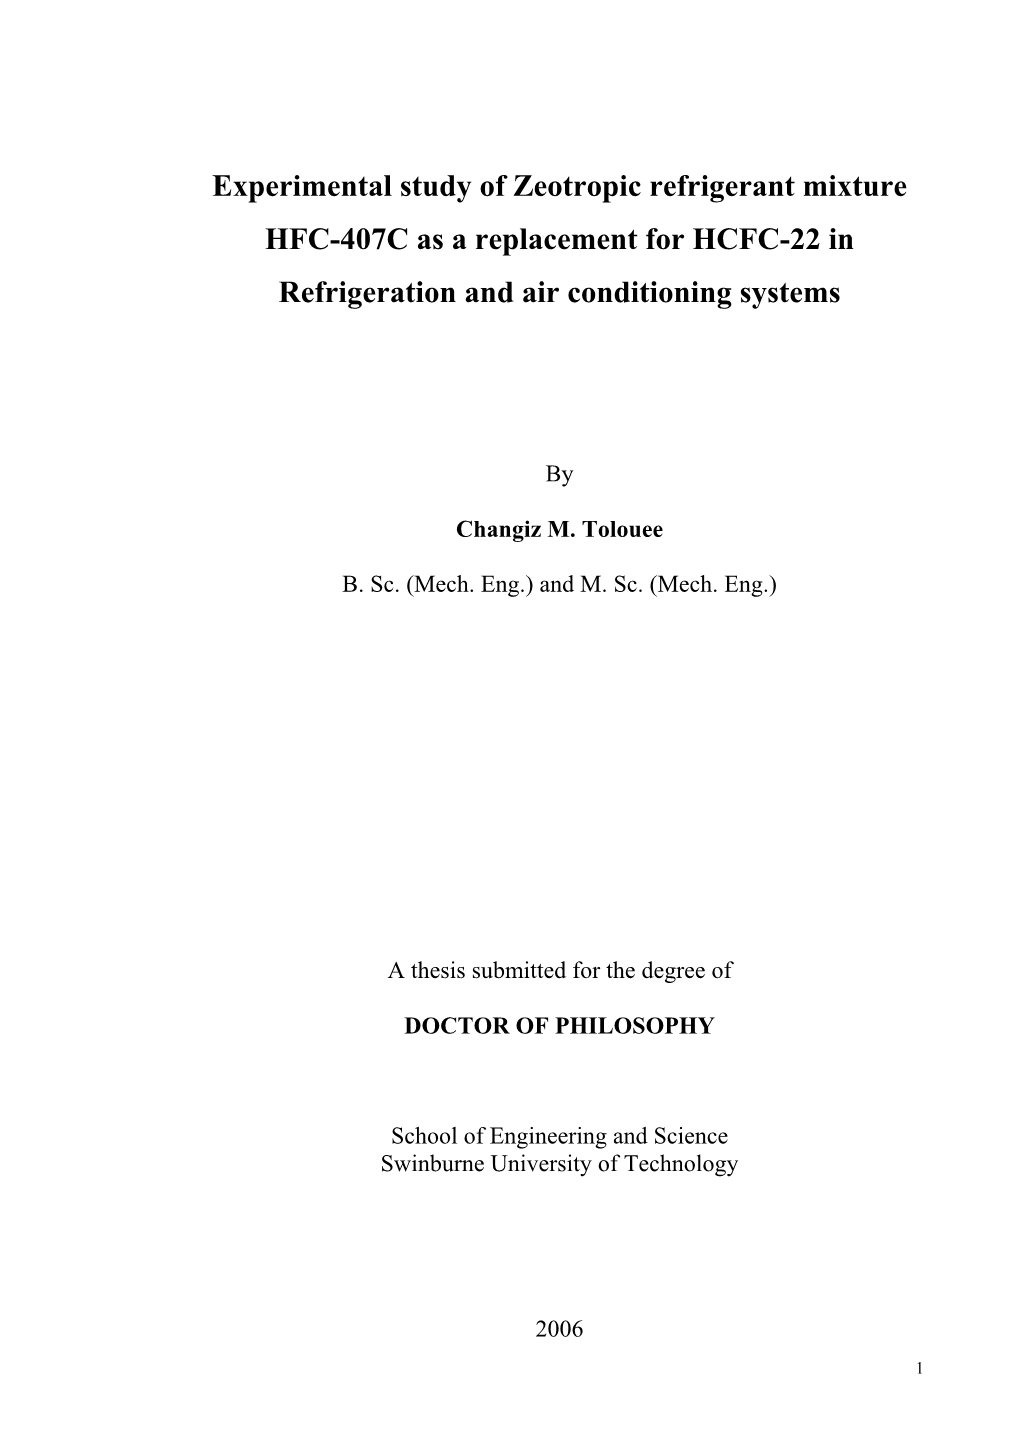 Experimental Study of Zeotropic Refrigerant Mixture HFC-407C As a Replacement for HCFC-22 in Refrigeration and Air Conditioning Systems